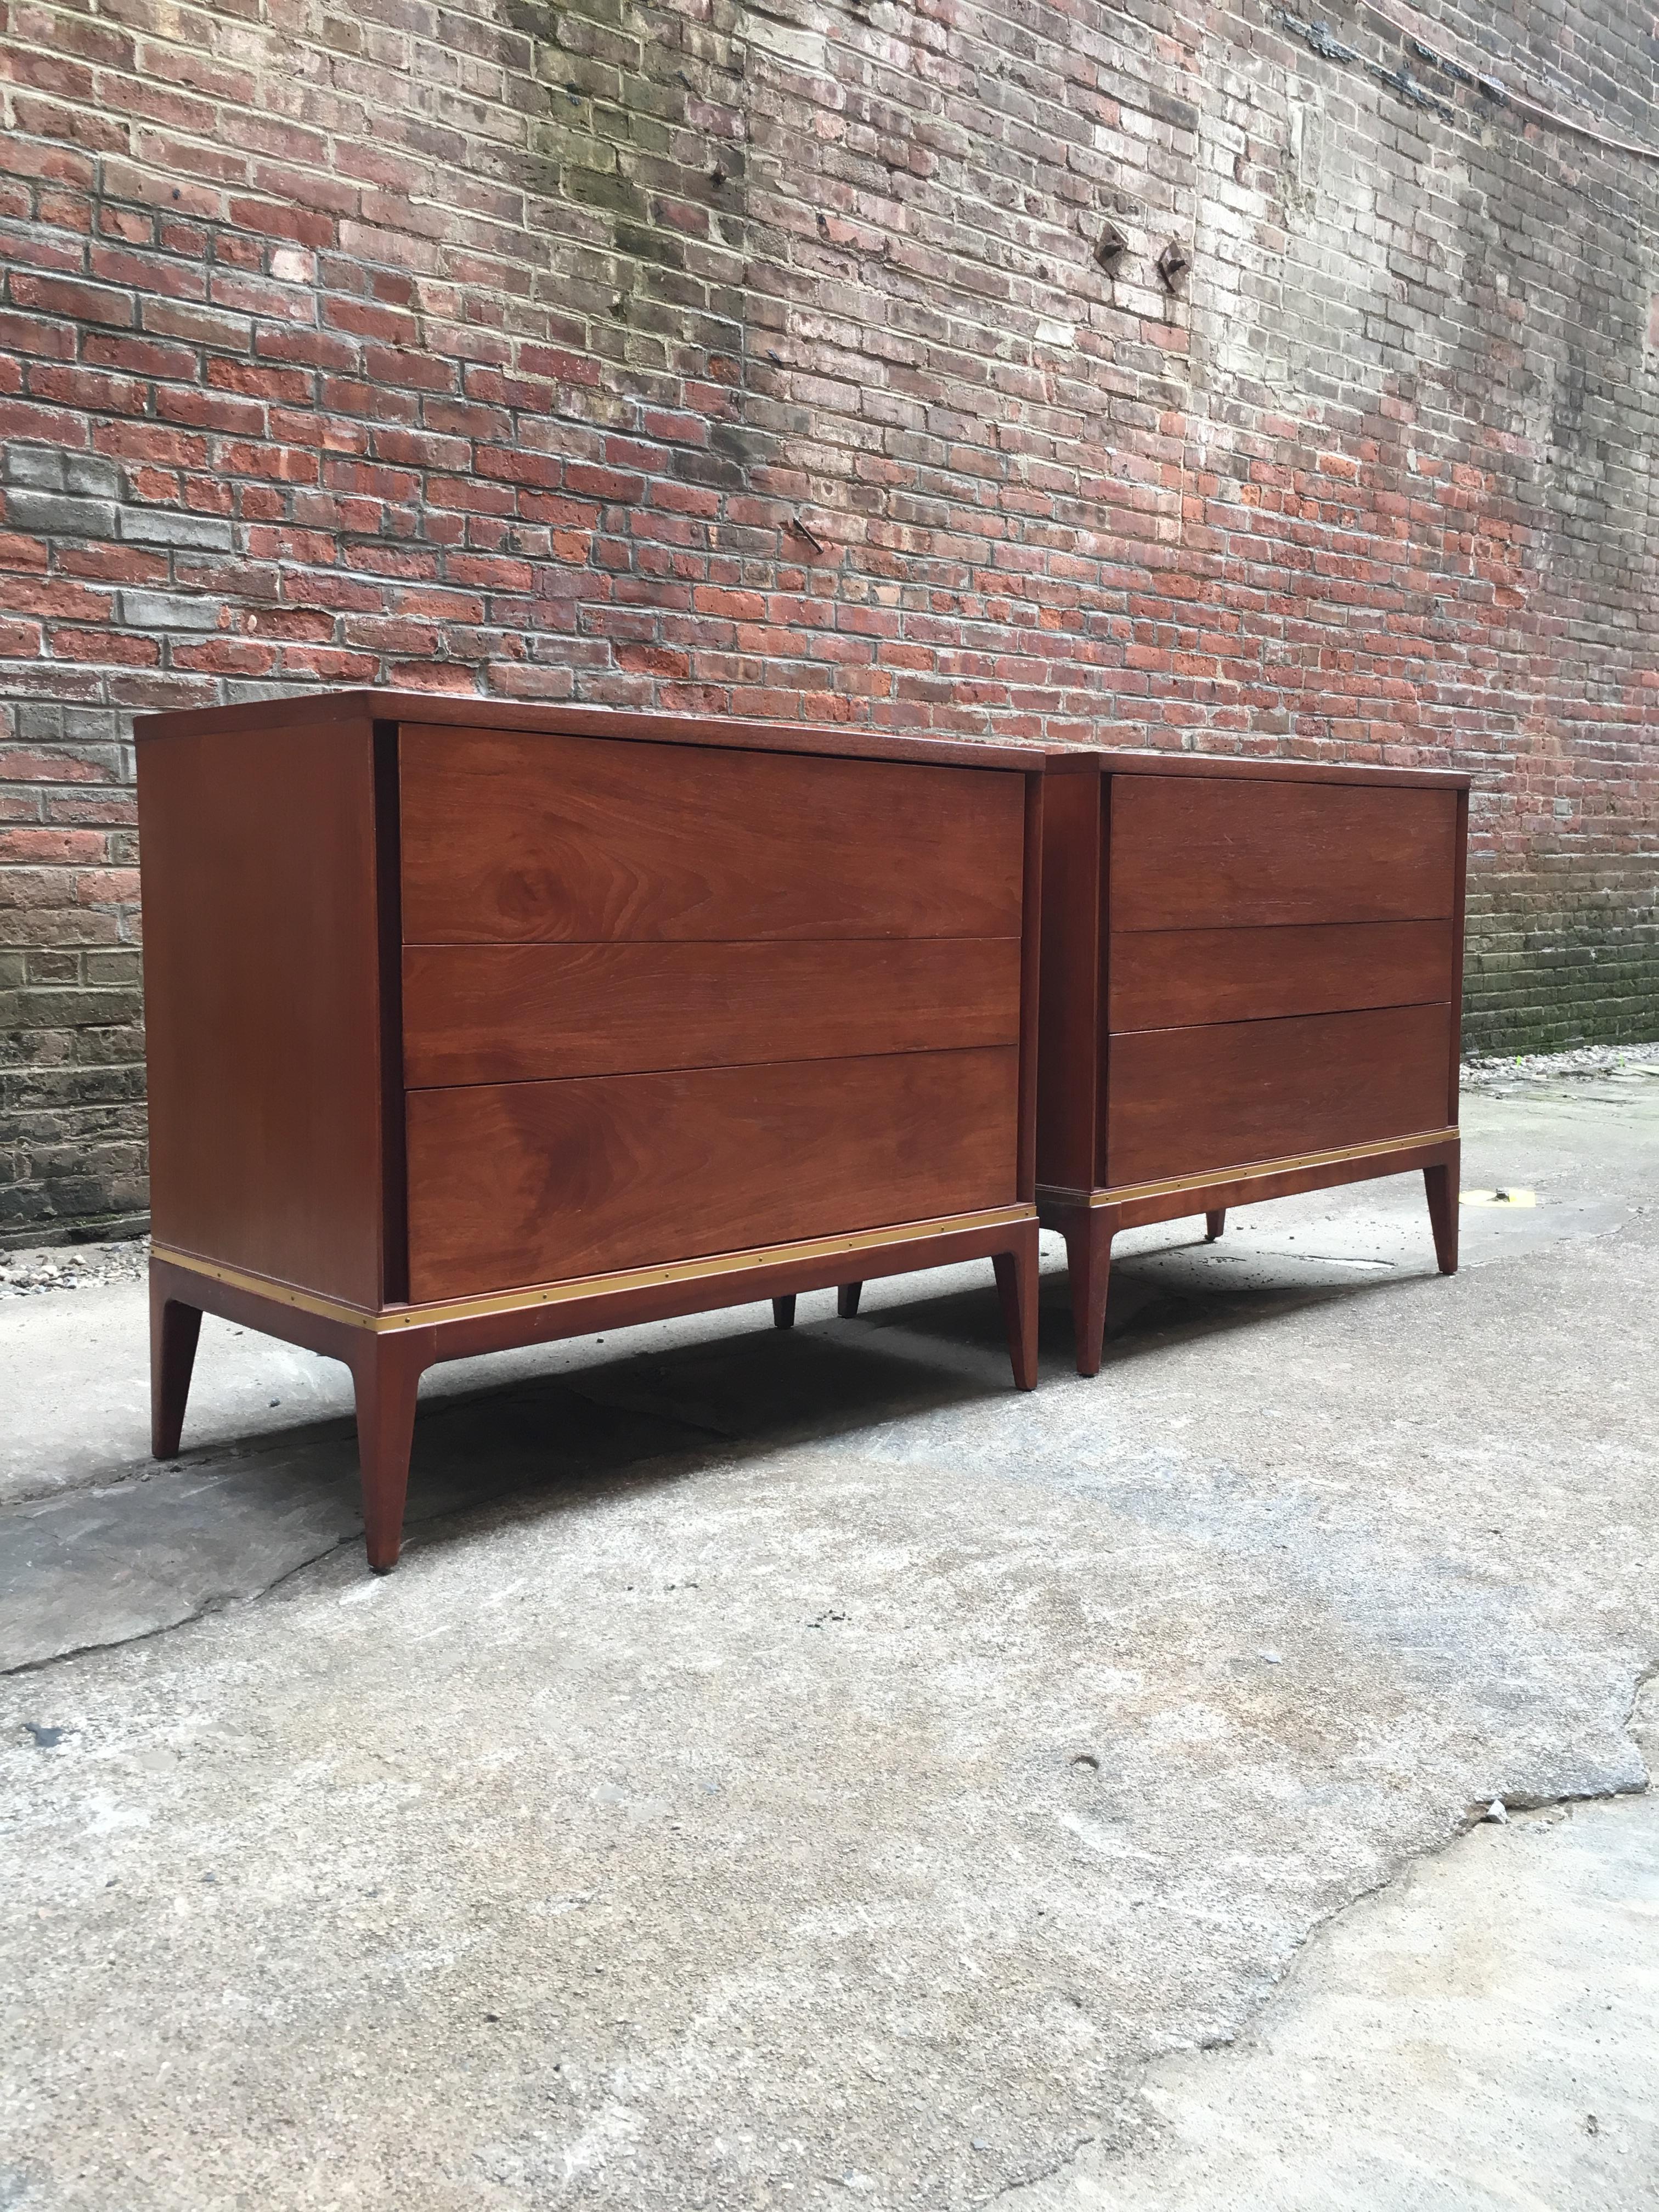 Pair of teak with brass detail three-drawer dressers retailed for John Stuart. True sign of quality when a piece of furniture has the John Stuart medallion in the top drawer. Warm teak with brass detail around the base. Featuring solid tapered legs